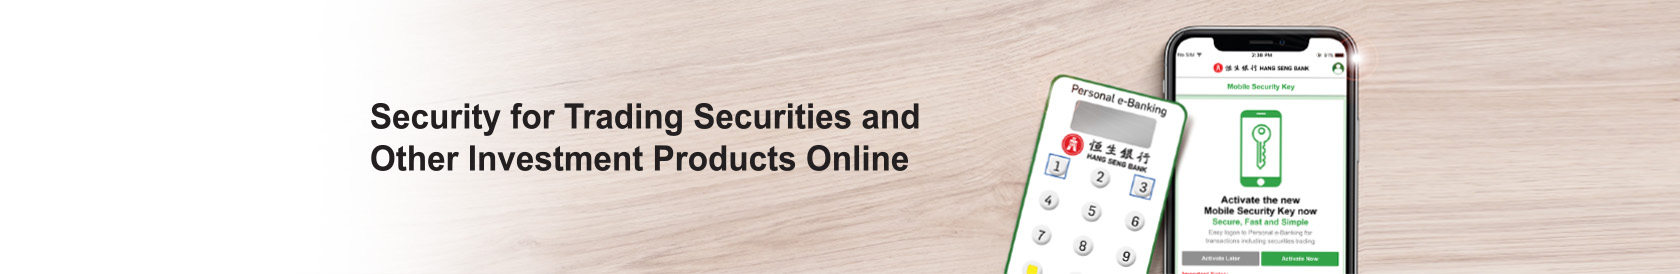 Security for Trading Securities and Other Investment Products Online